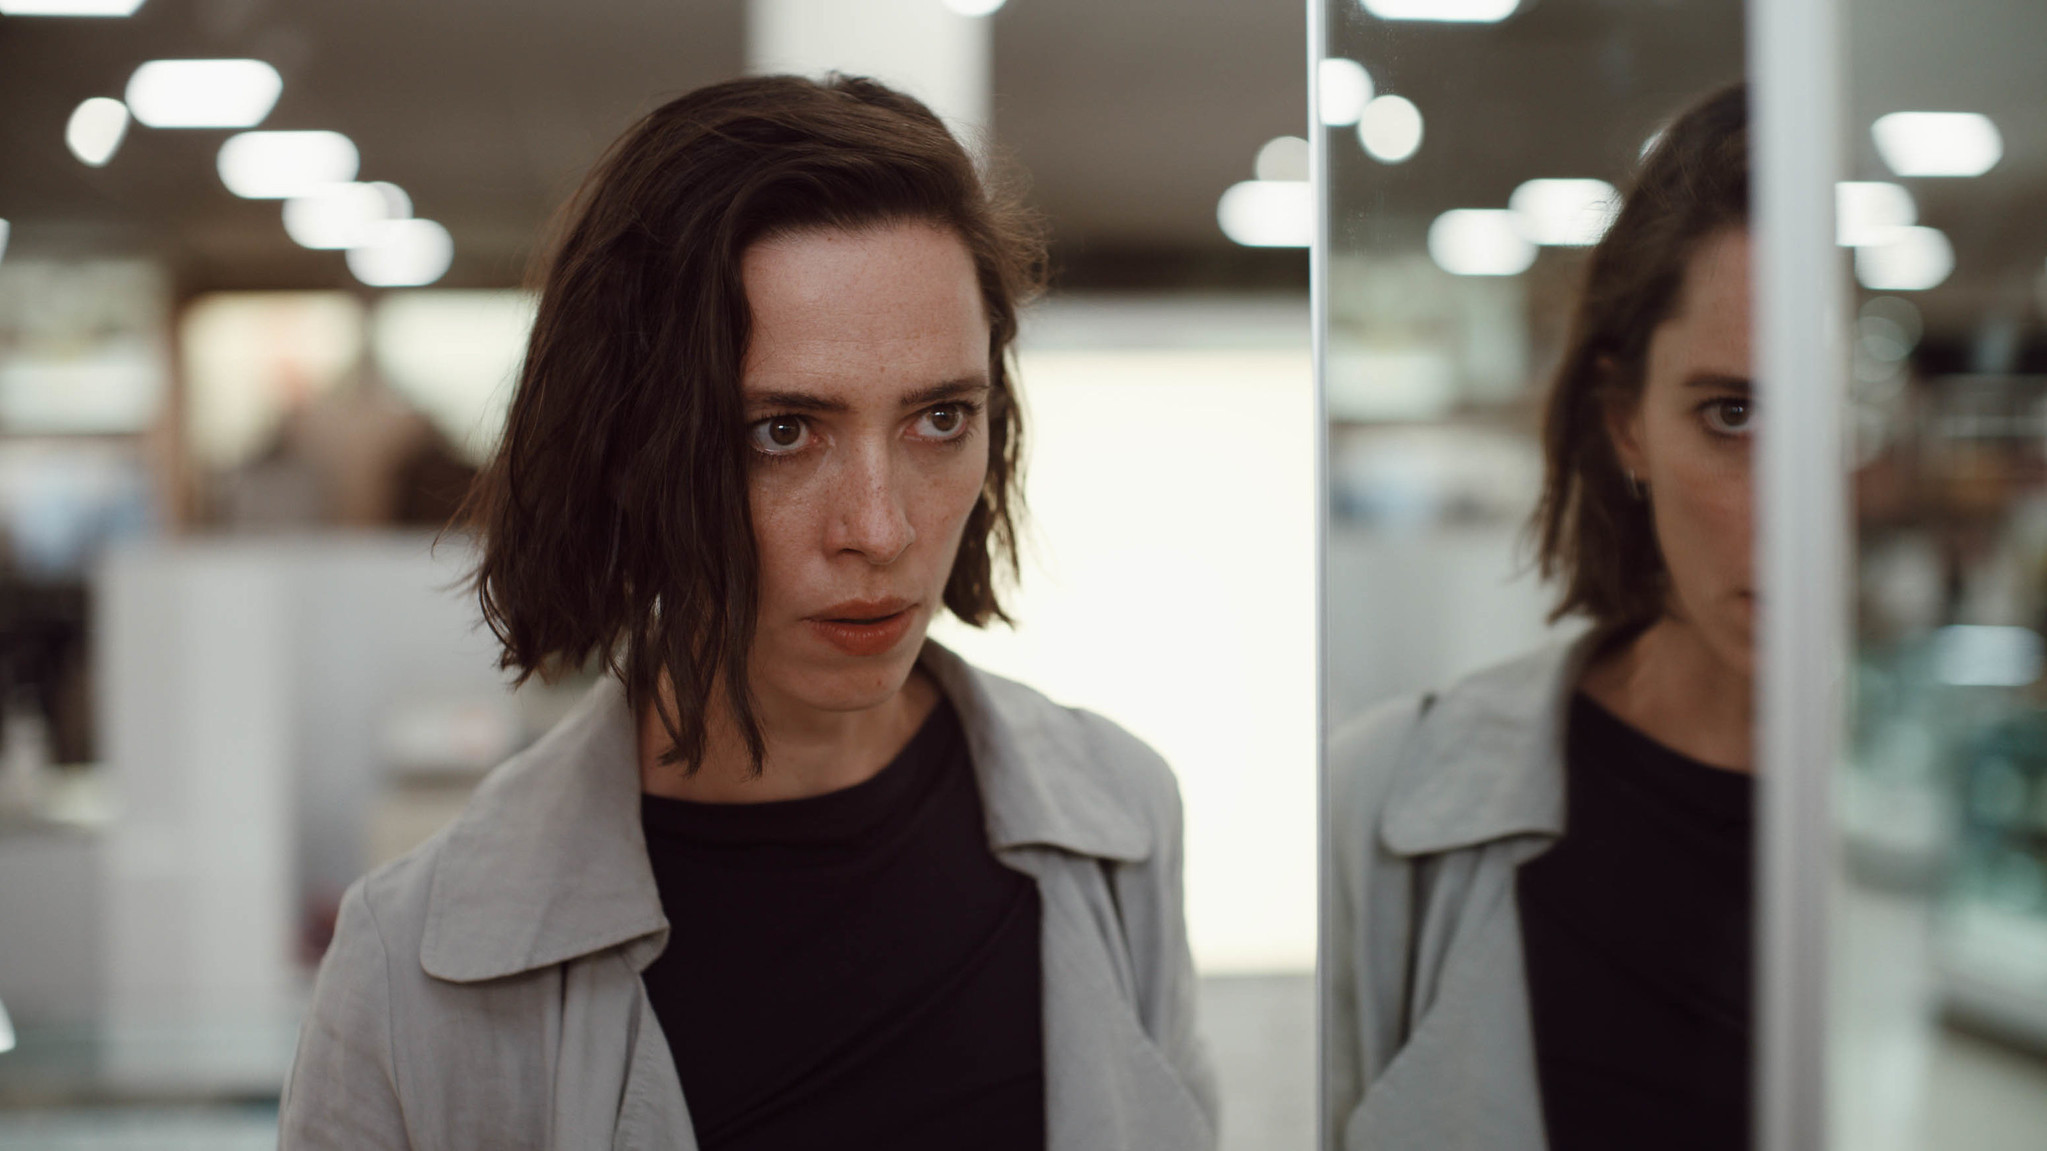 Rebecca Hall appears in Resurrection by Andrew Semans, an official selection of the Premieres section at the 2022 Sundance Film Festival. Courtesy of Sundance Institute | photo by Wyatt Garfield.